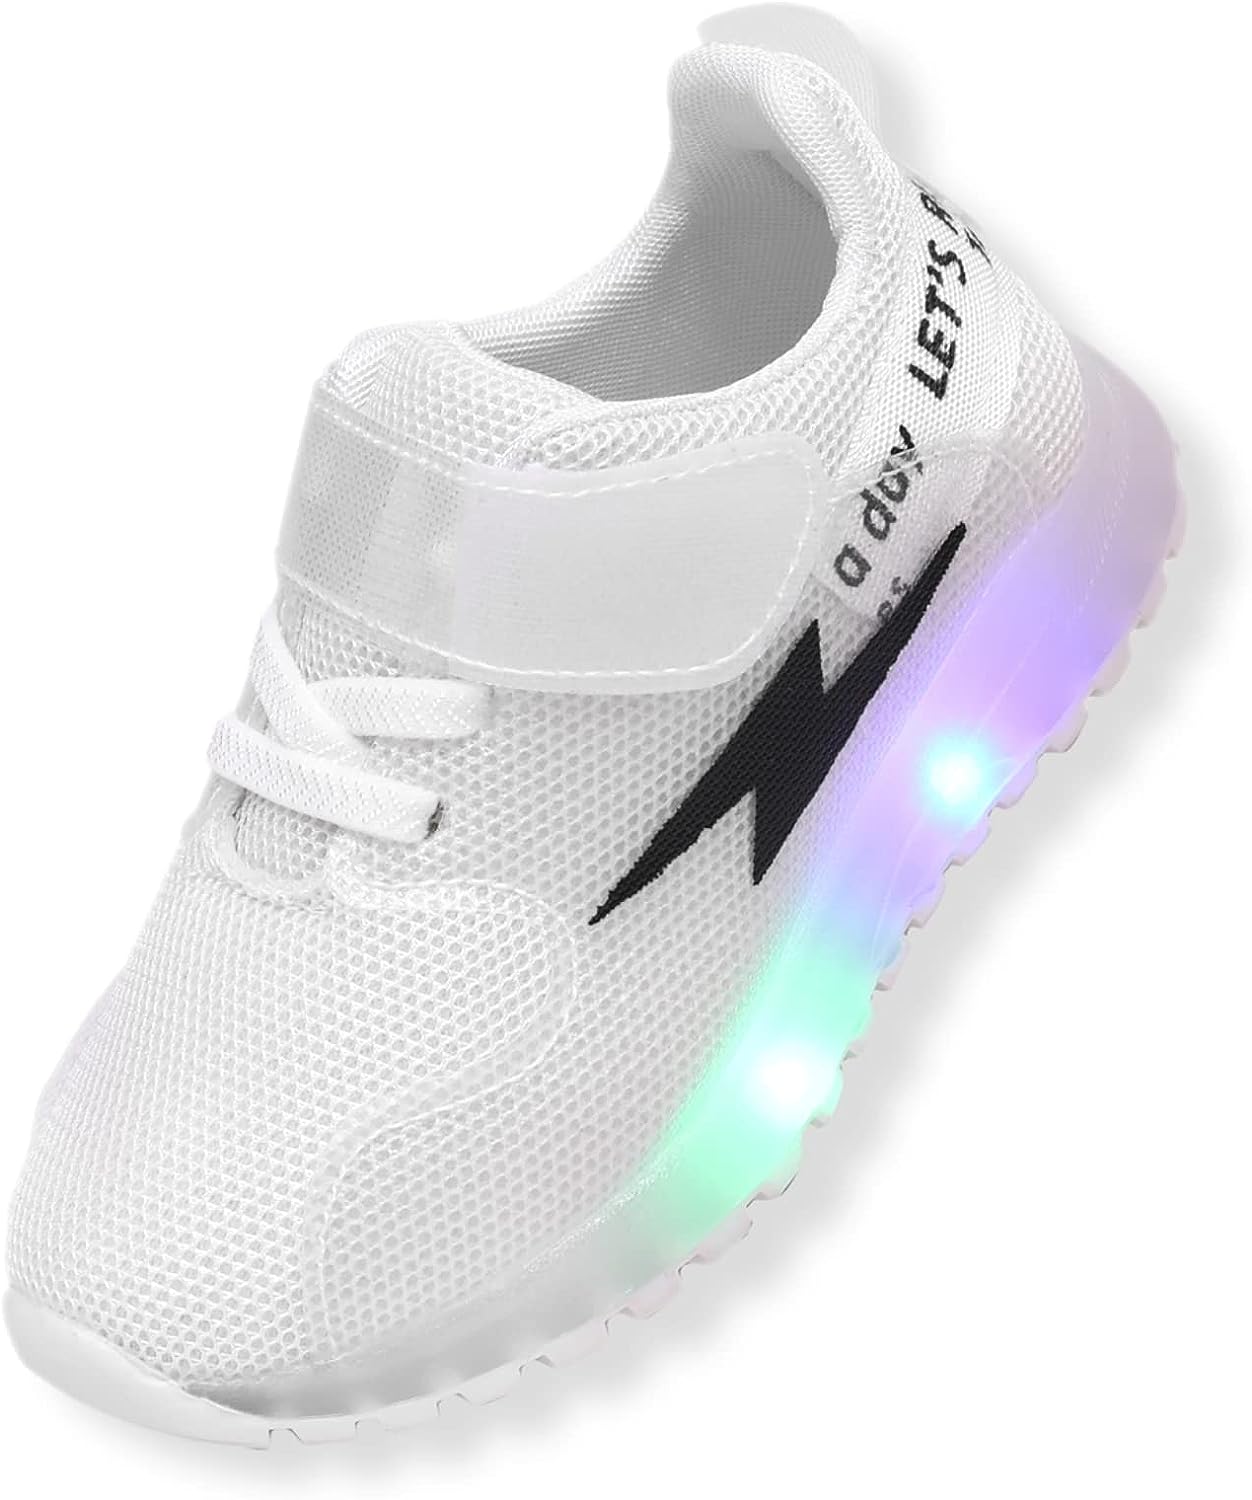 PATPAT Toddler Shoes Kid Shoes with LED Light Up Shoes [...]